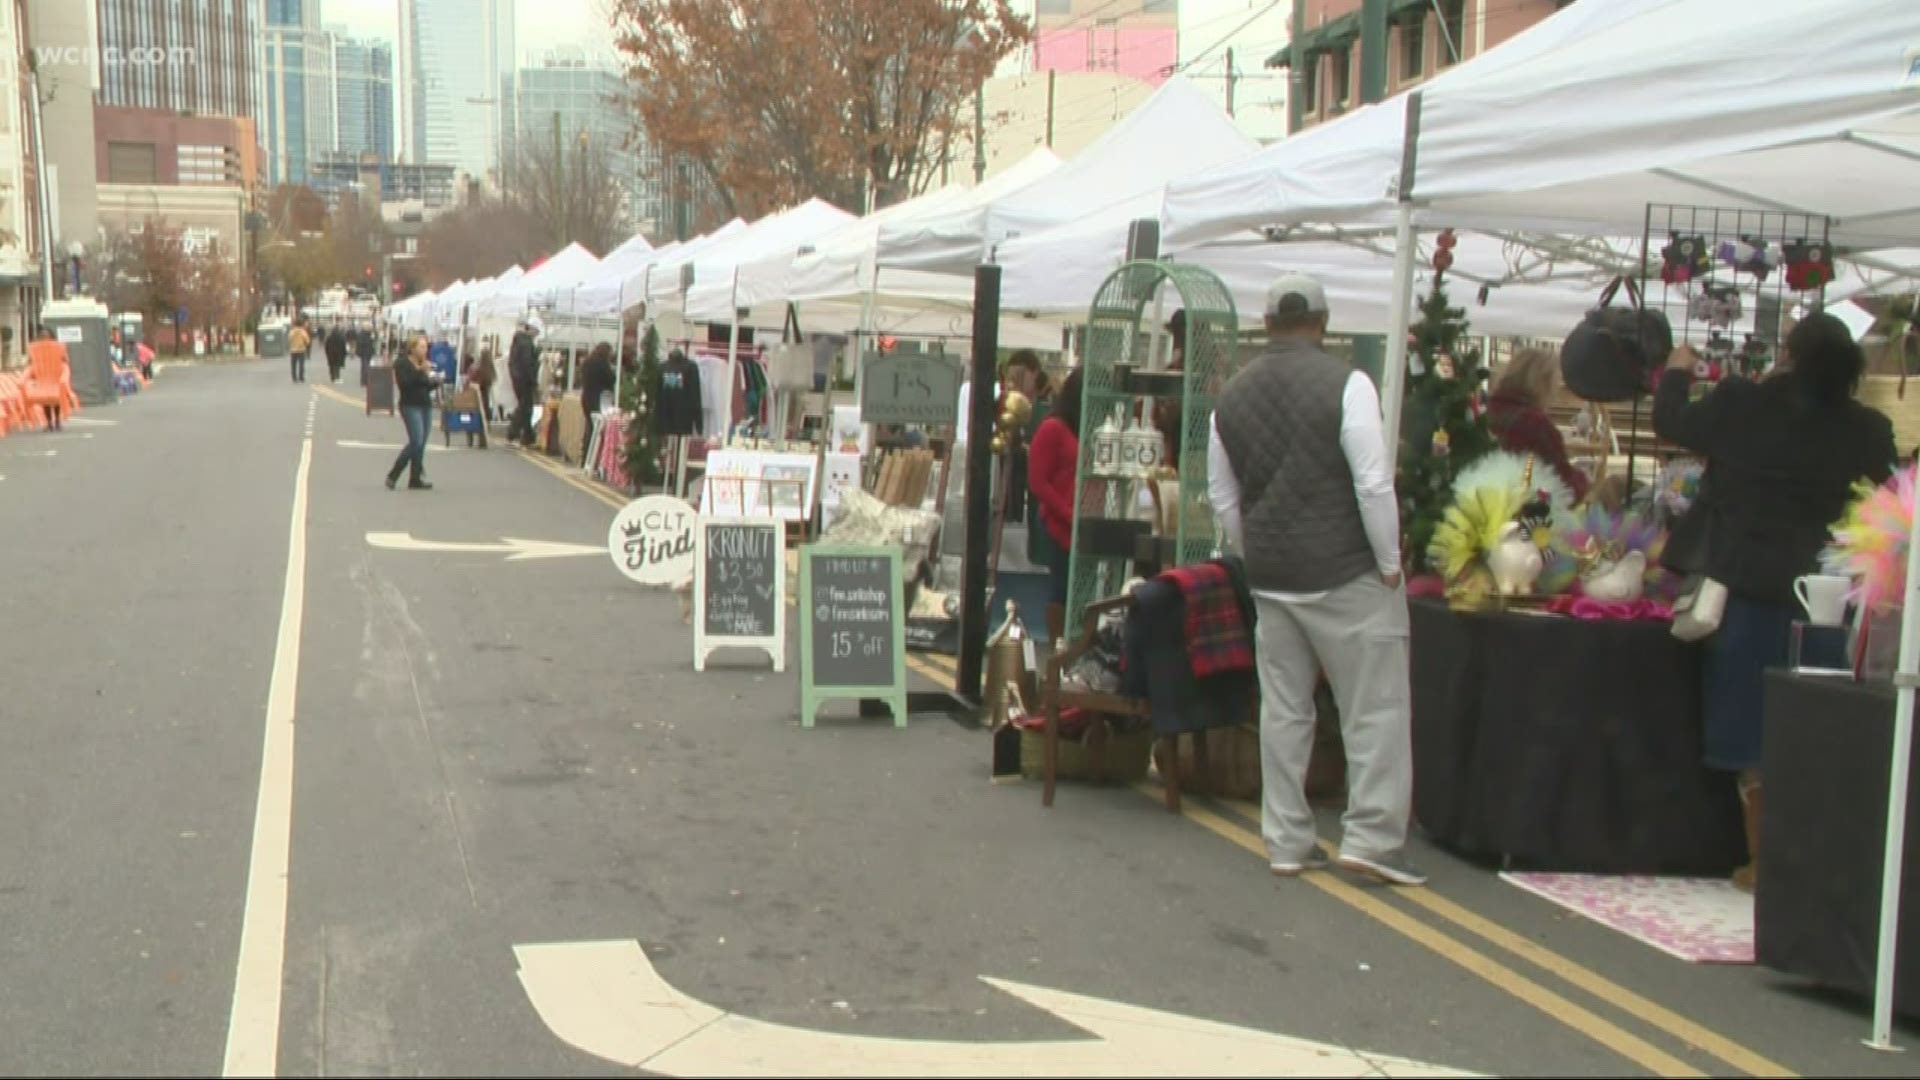 In between Black Friday and Cyber Monday, Small Business Saturday encourages people to shop small and support their local businesses. Over 200 local shops took part.